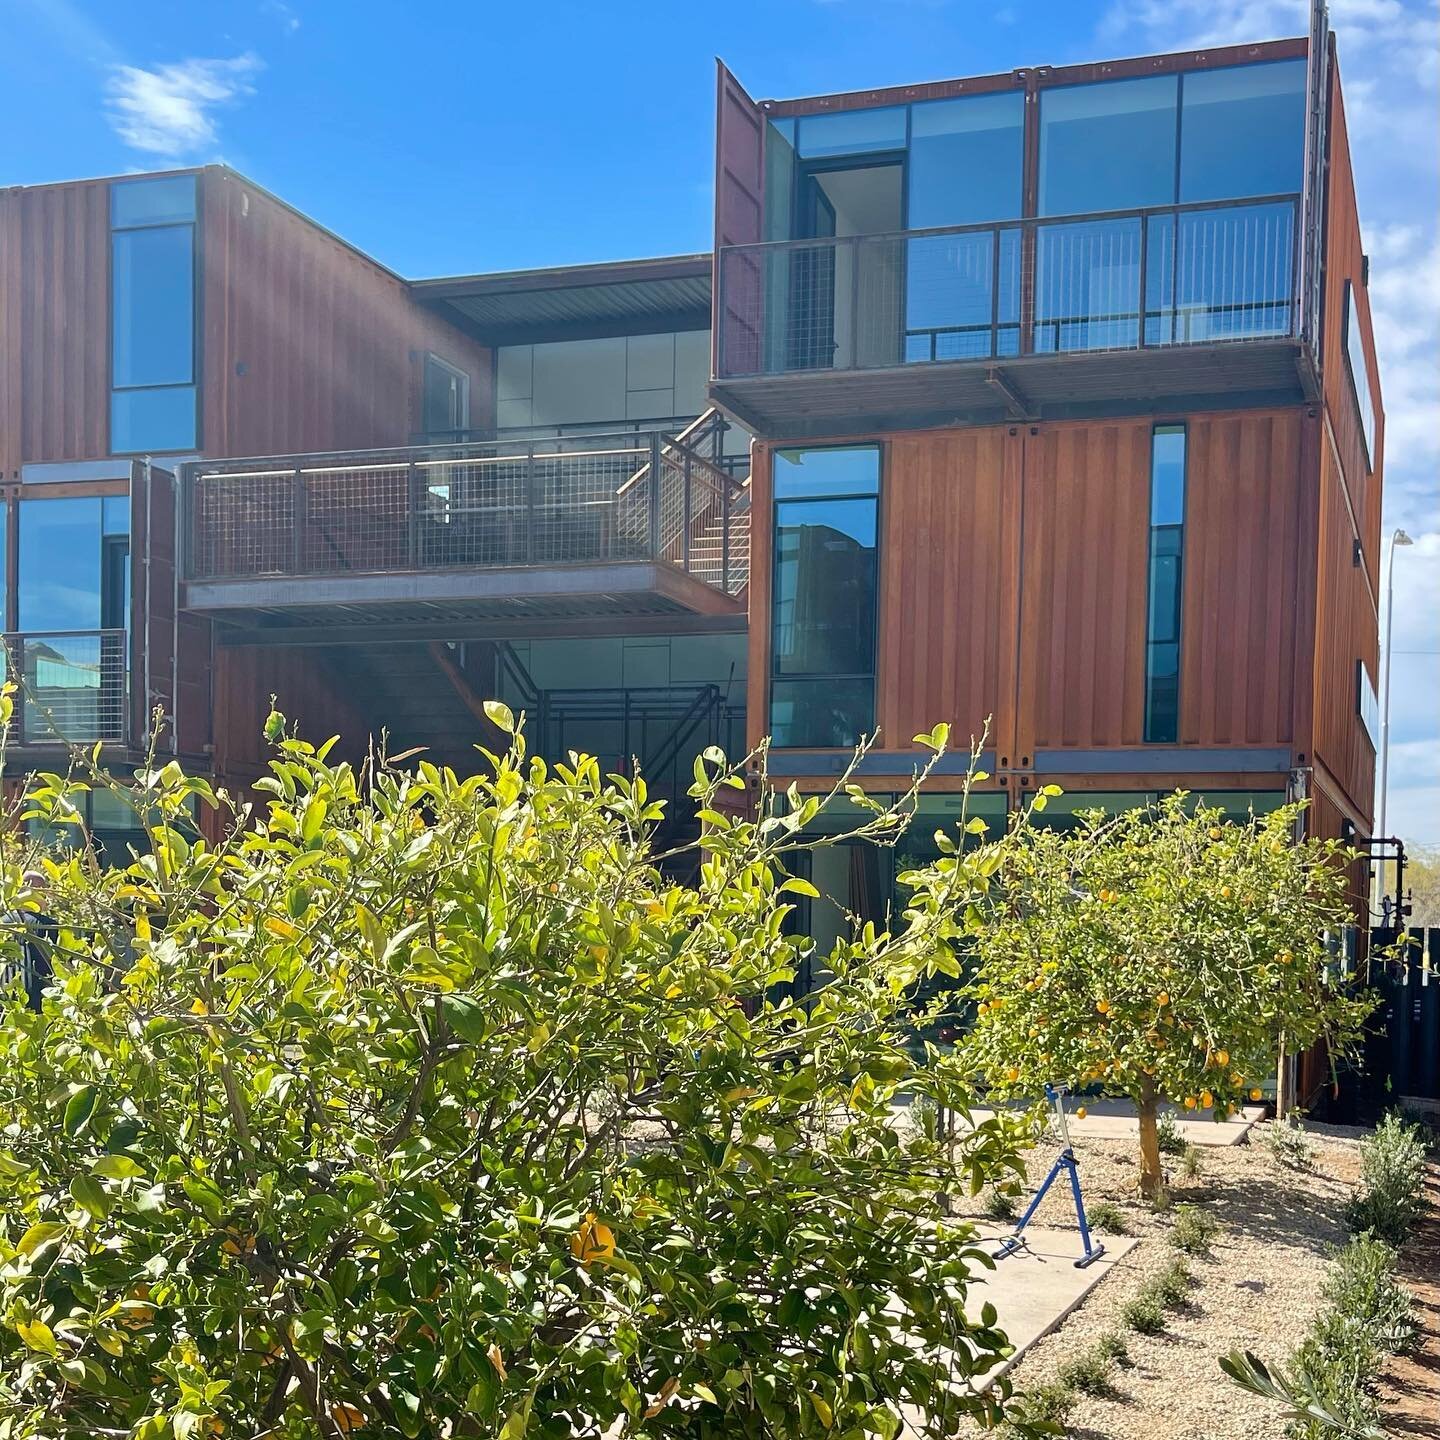 Landscaping ✅ Lighting ✅Living Room✅  FREIGHT Tempe is pre-leasing next week. Don&rsquo;t miss out - join our interest list at liveinfreight.com #modernapartment #tempe #shippingcontainerhome